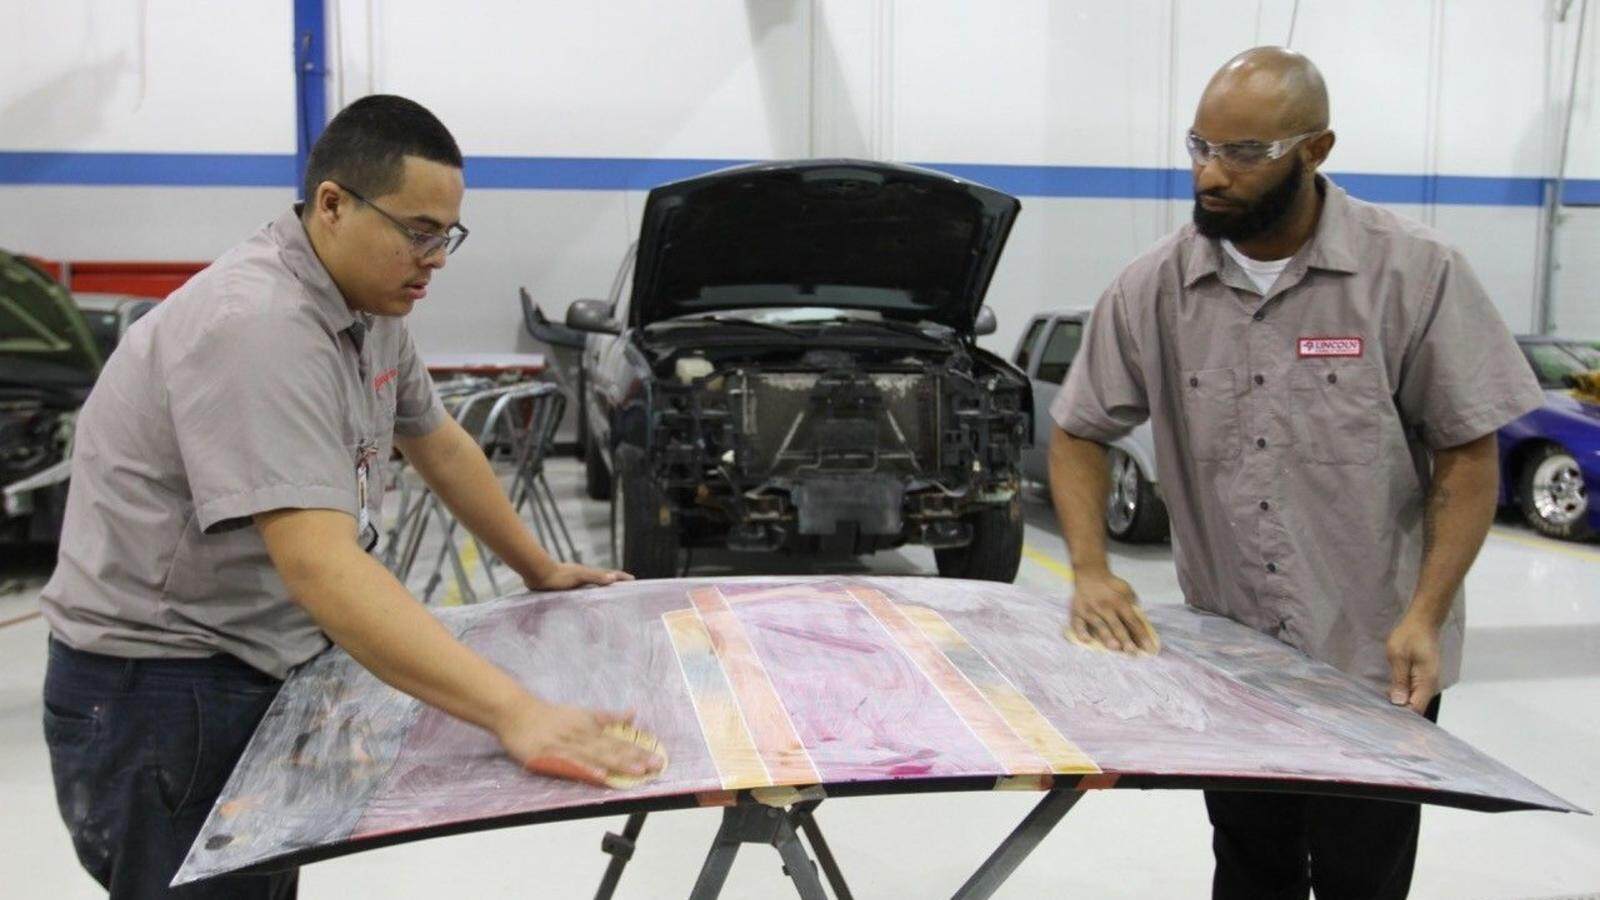 Collision repair students practice preparing a vehicles hood for final refinishing.